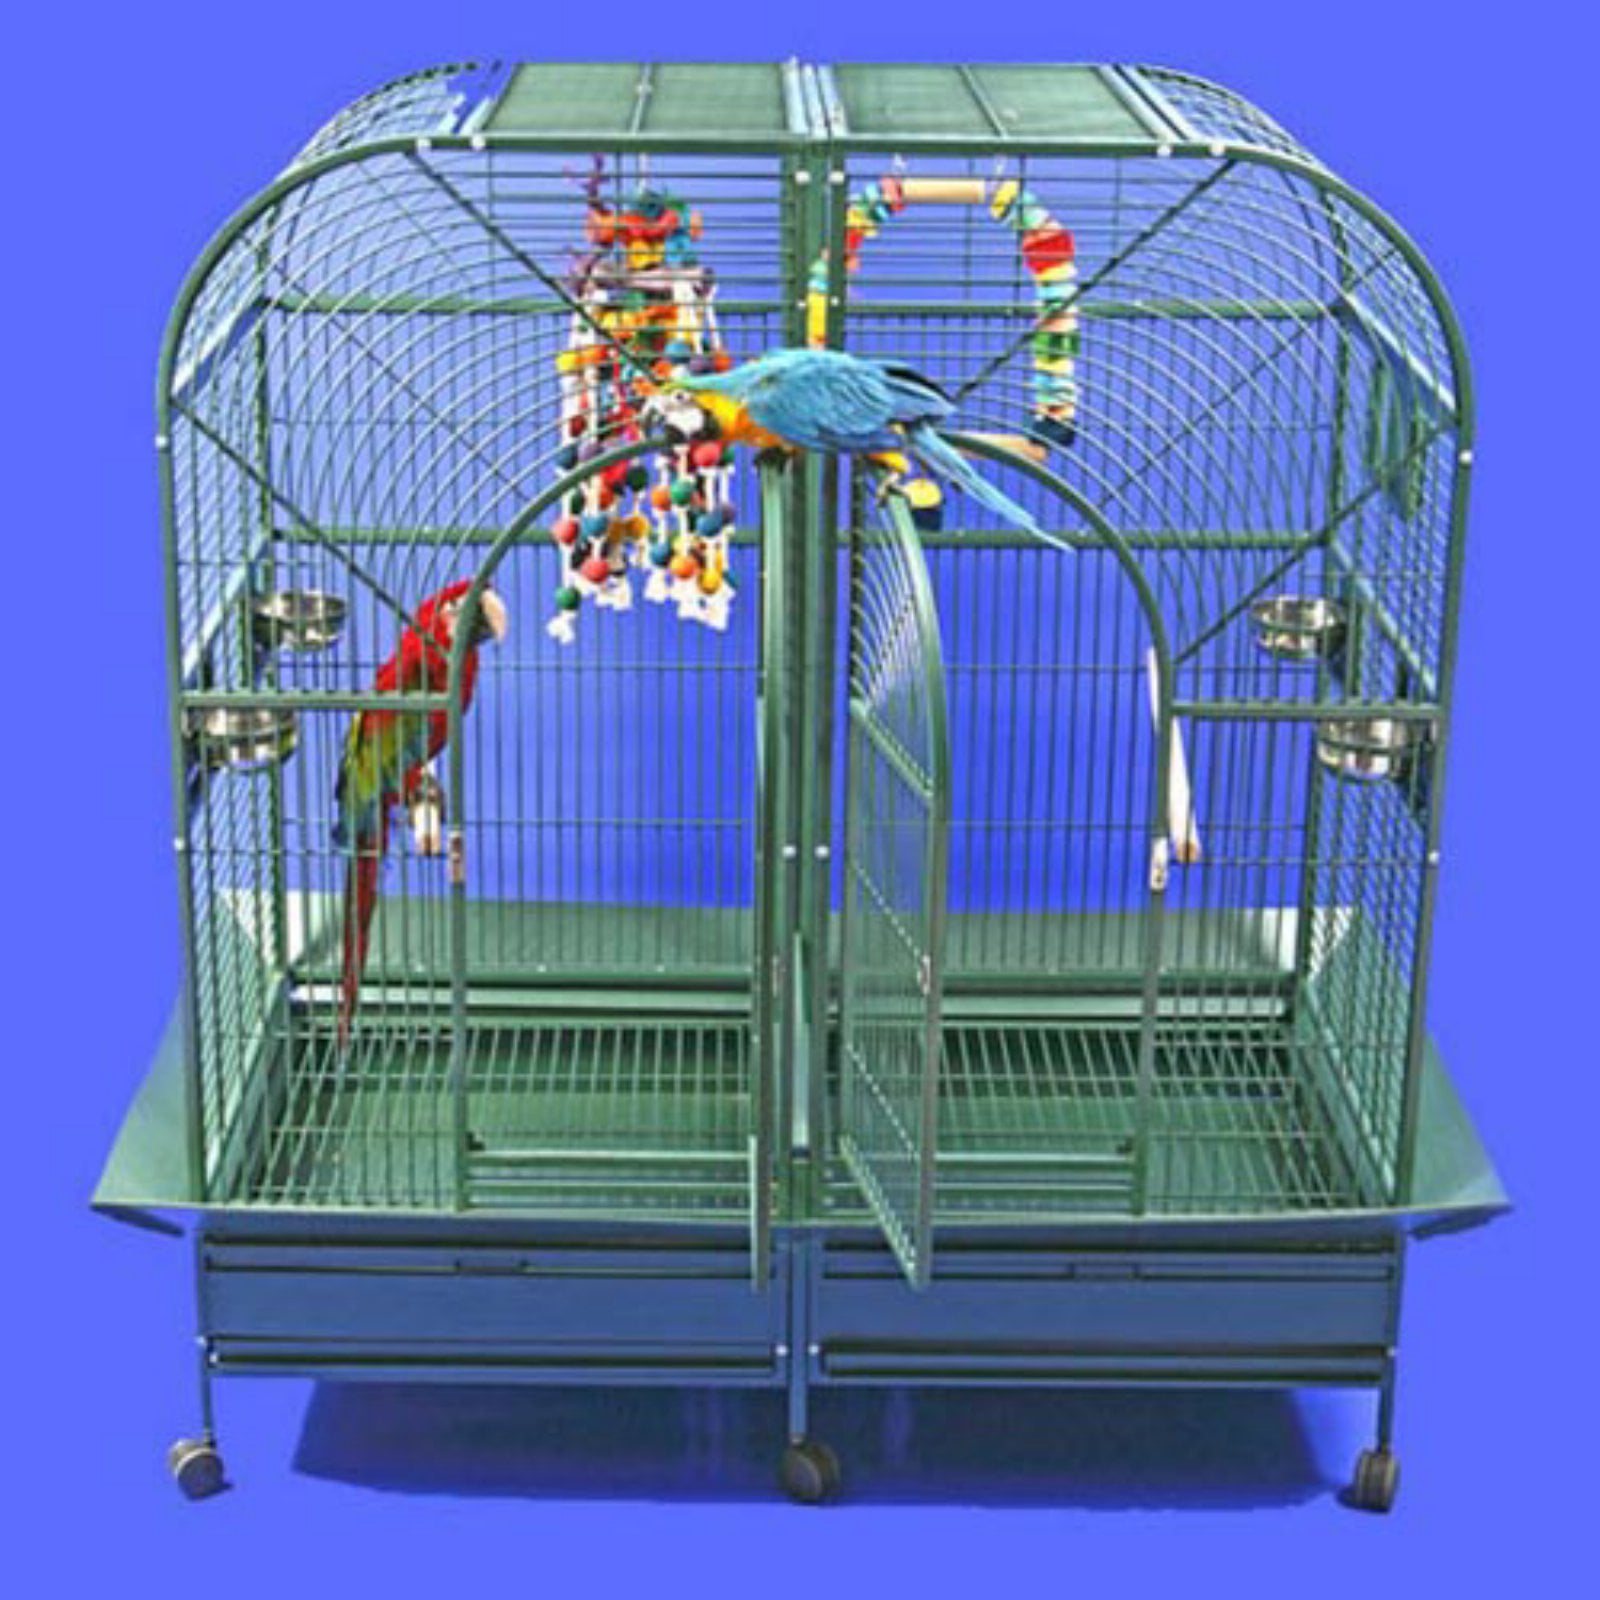 A And E Cage Co Dome Top Style Double Macaw Bird Cage 6432 Walmart Com Walmart Com,Frozen Chicken Breast Crock Pot Recipes